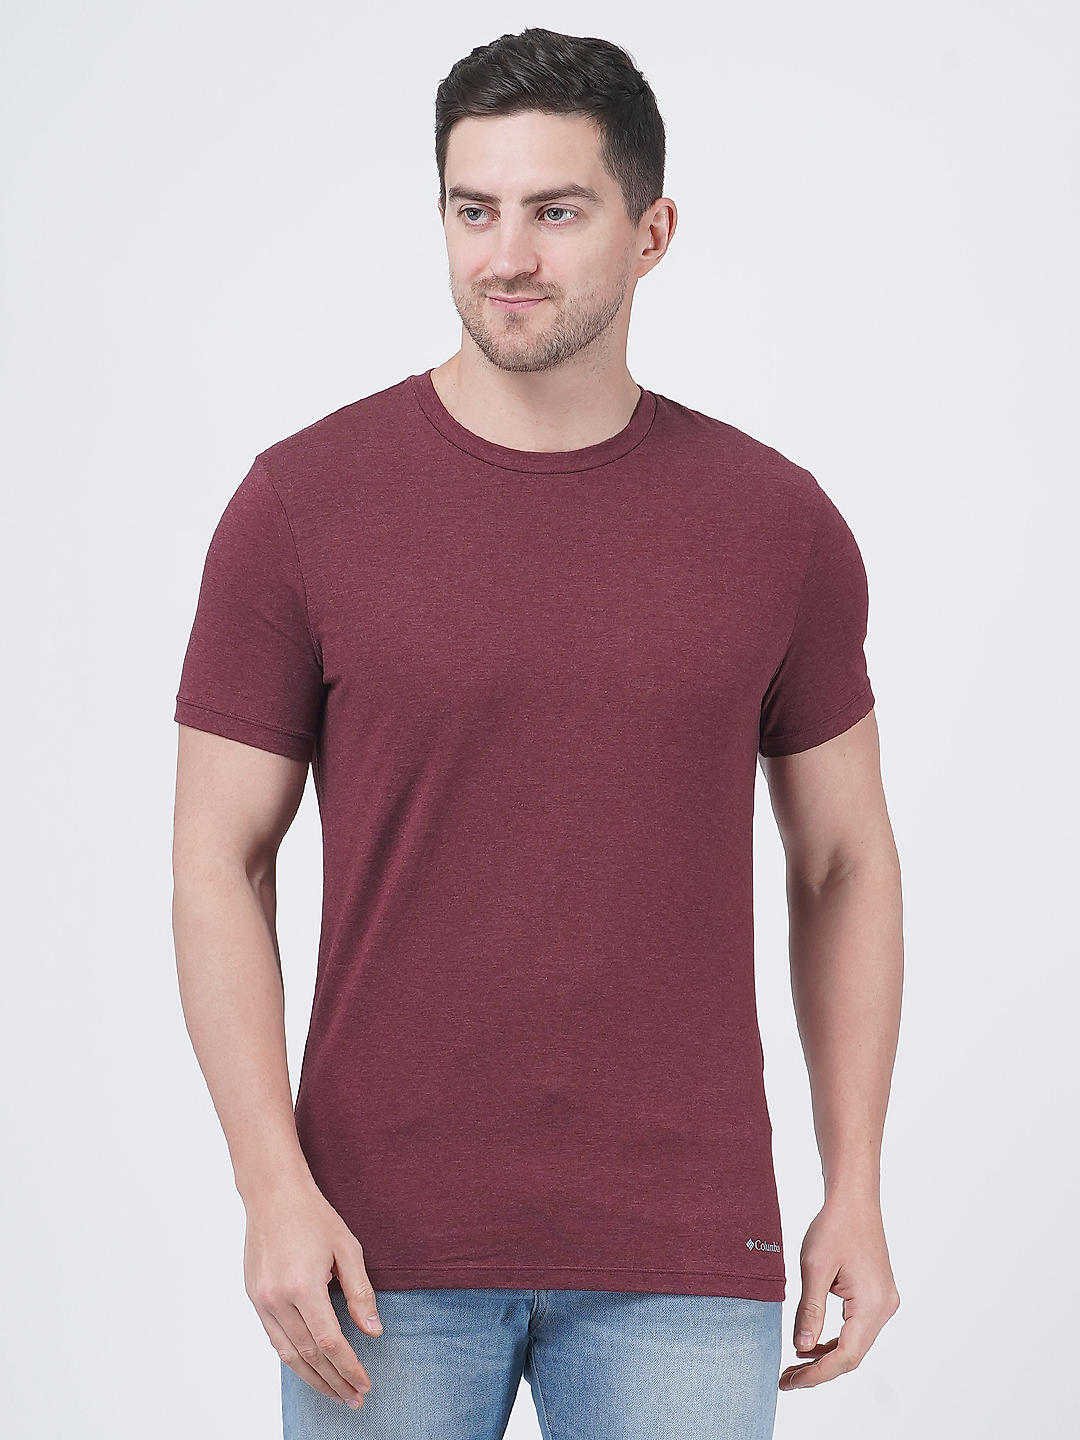 Columbia Performance Cotton Stretch Crew Tee 3-Pack